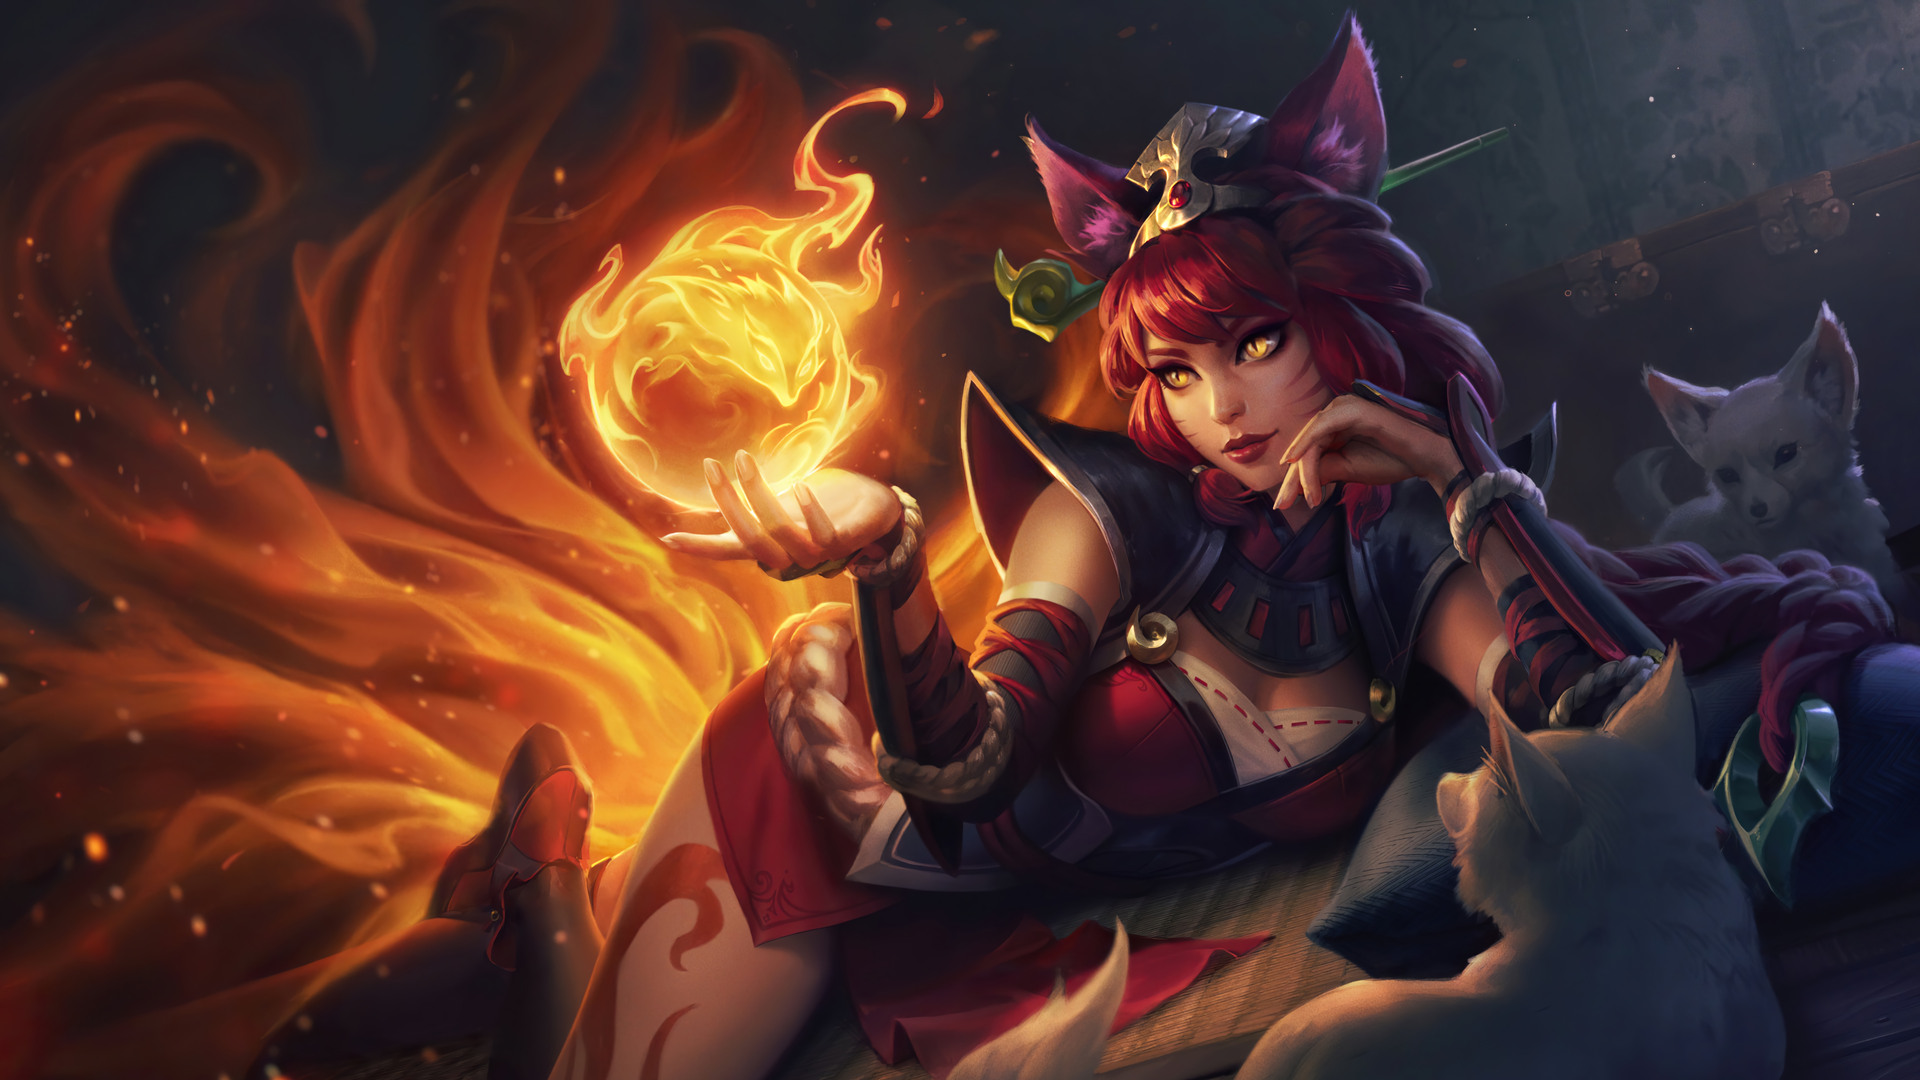 Ahri is a playable character in the popular online game League of Legends. She is known for her blonde hair and seductive charm.
2. Ahri - Champions - Universe of League of Legends - wide 9